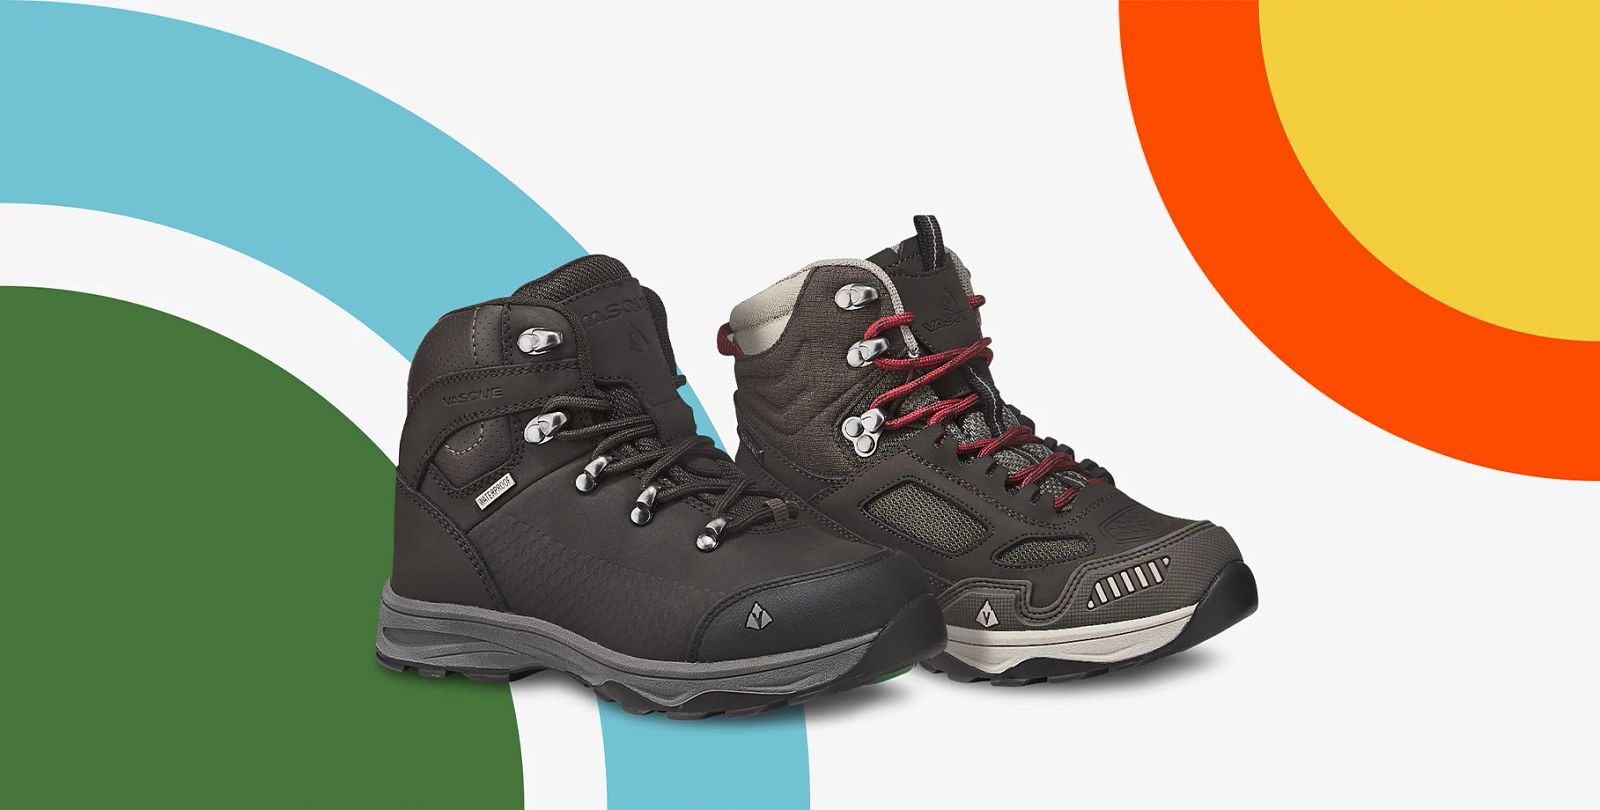 Vasque | Performance Hiking Boots and Hiking Shoes for Men, Women, Kids